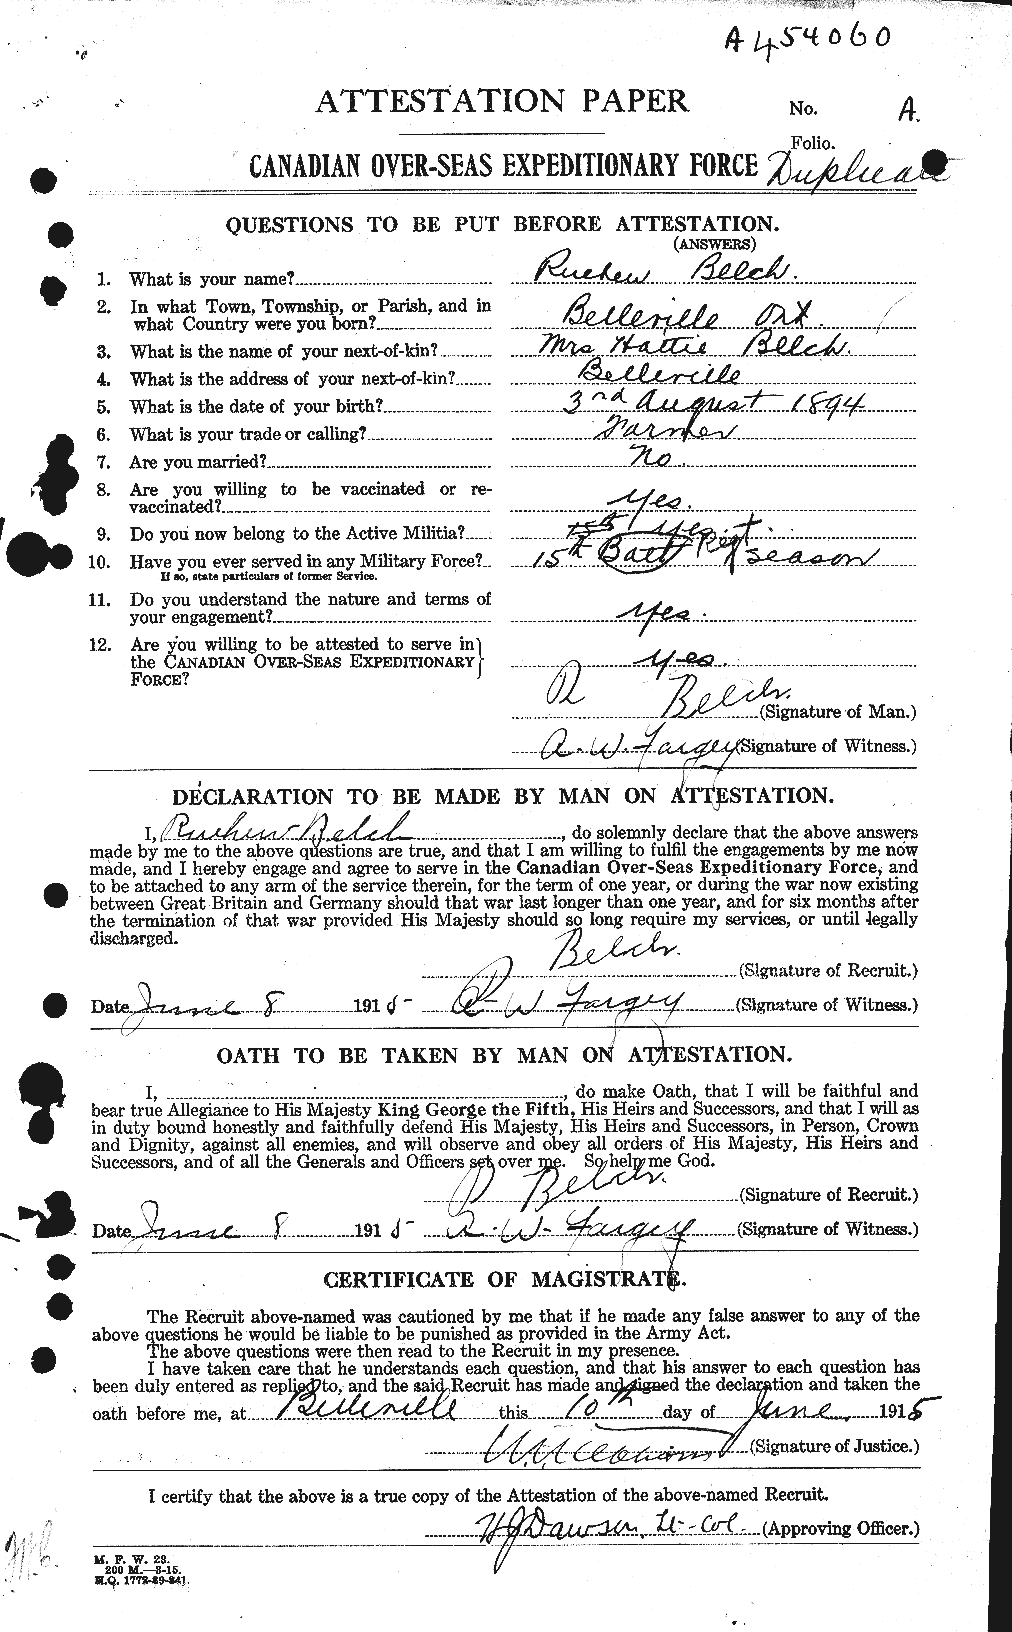 Personnel Records of the First World War - CEF 232596a